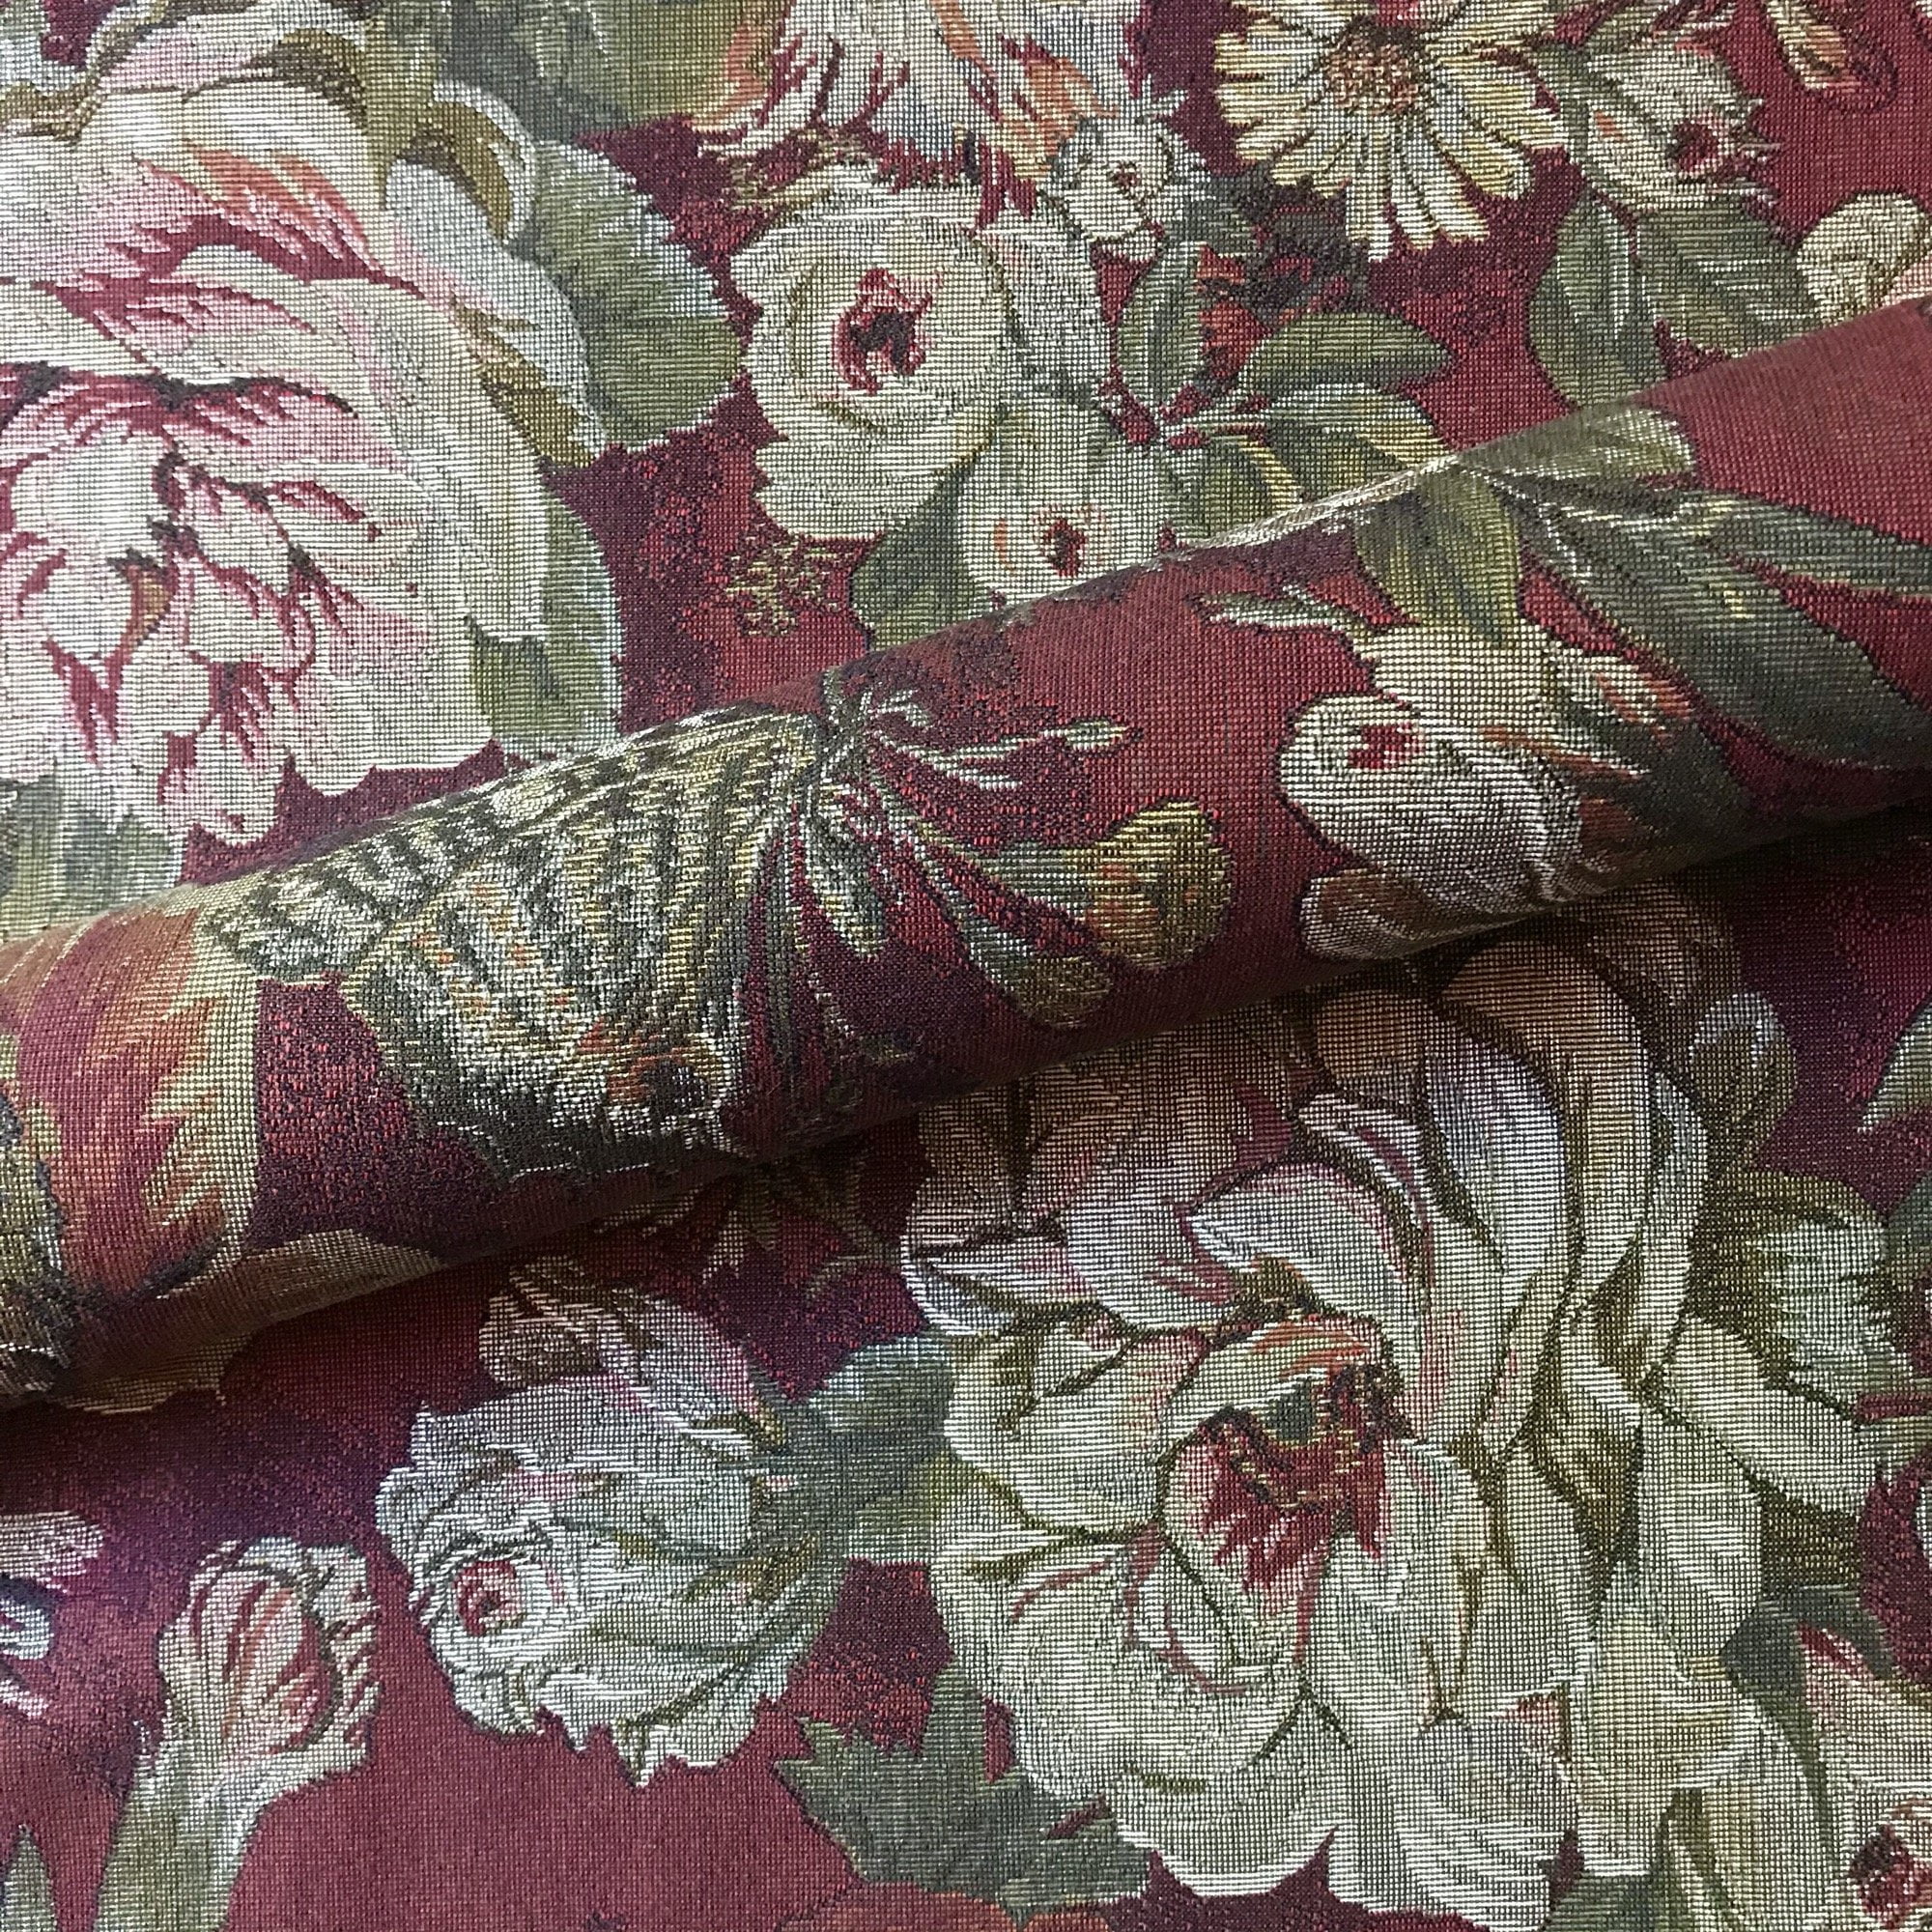 Vintage Fabric by the Yard Upholstery, Flourishing Plants with Rustic  Branches Leaves Nostalgic Rural Field Art, Decorative Fabric for DIY and  Home